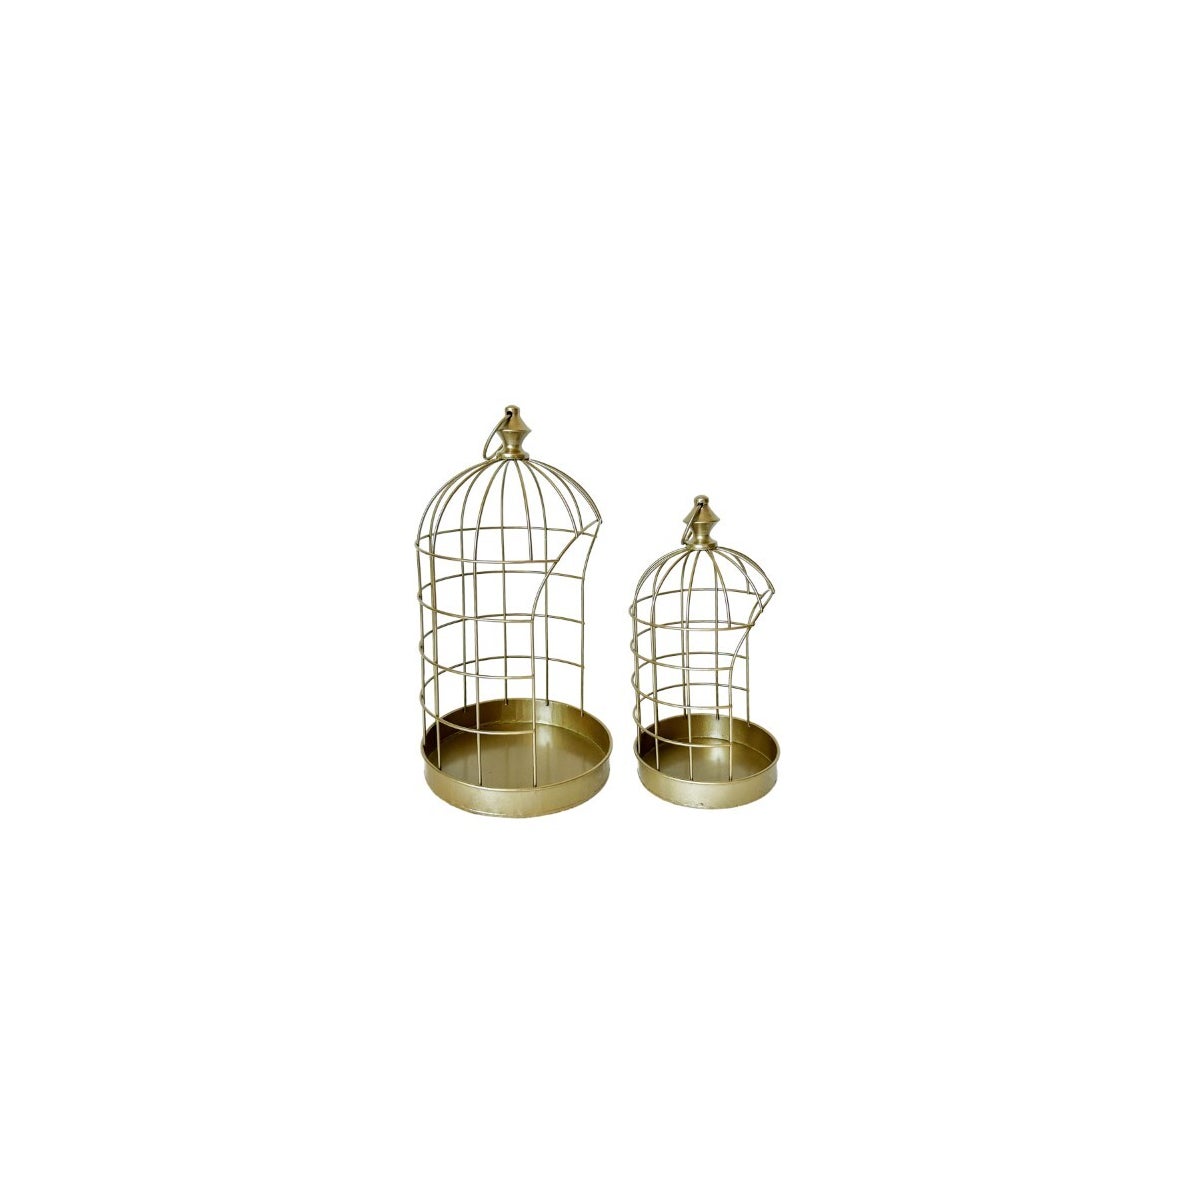 Open Cage Lantern S/2 Gold